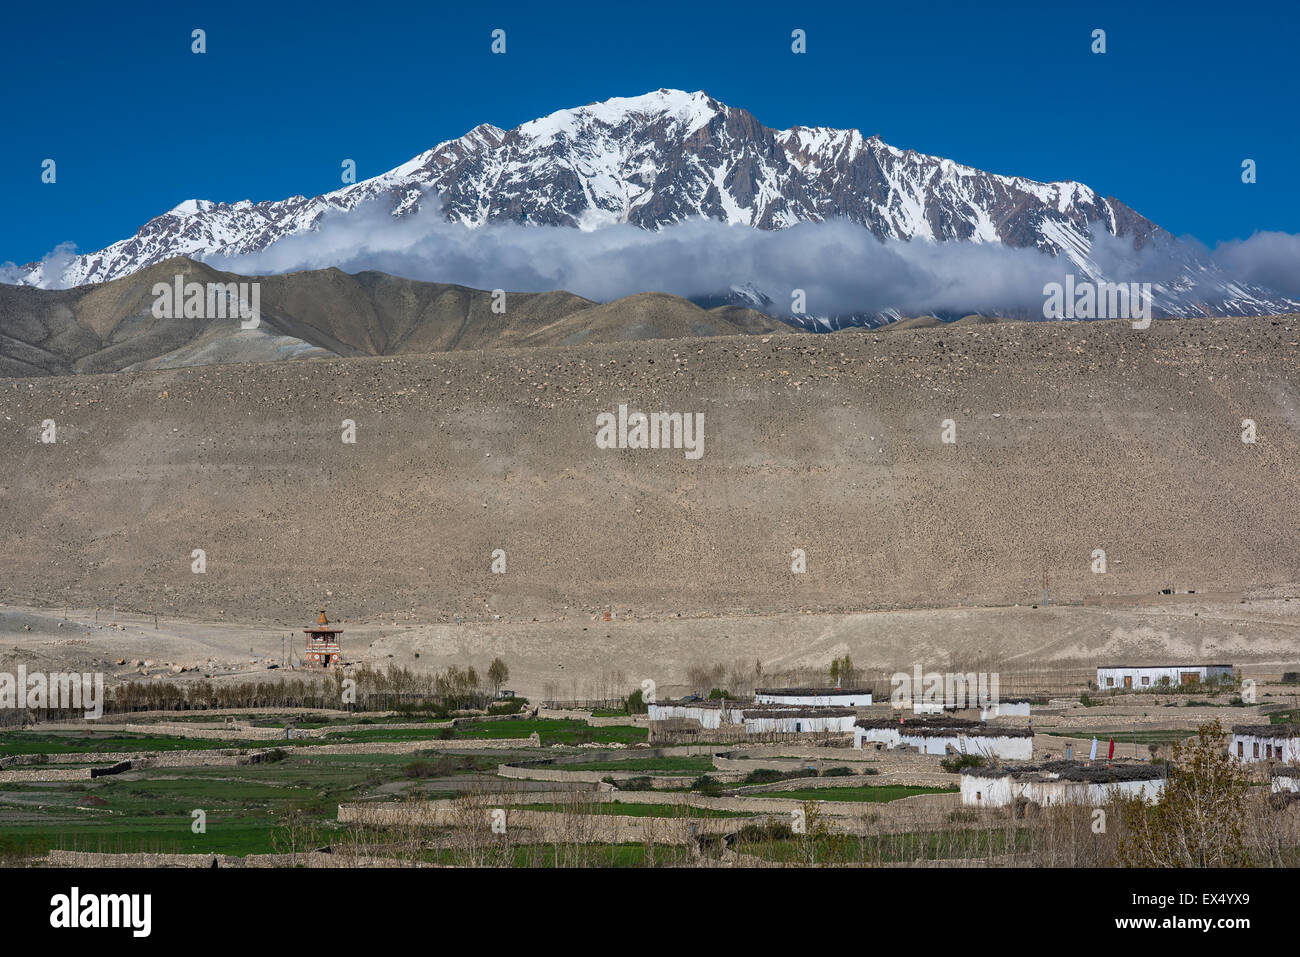 Small fields, surrounded by a stone wall and houses in the village of Tsarang against snowy mountains, former Kingdom of Mustang Stock Photo